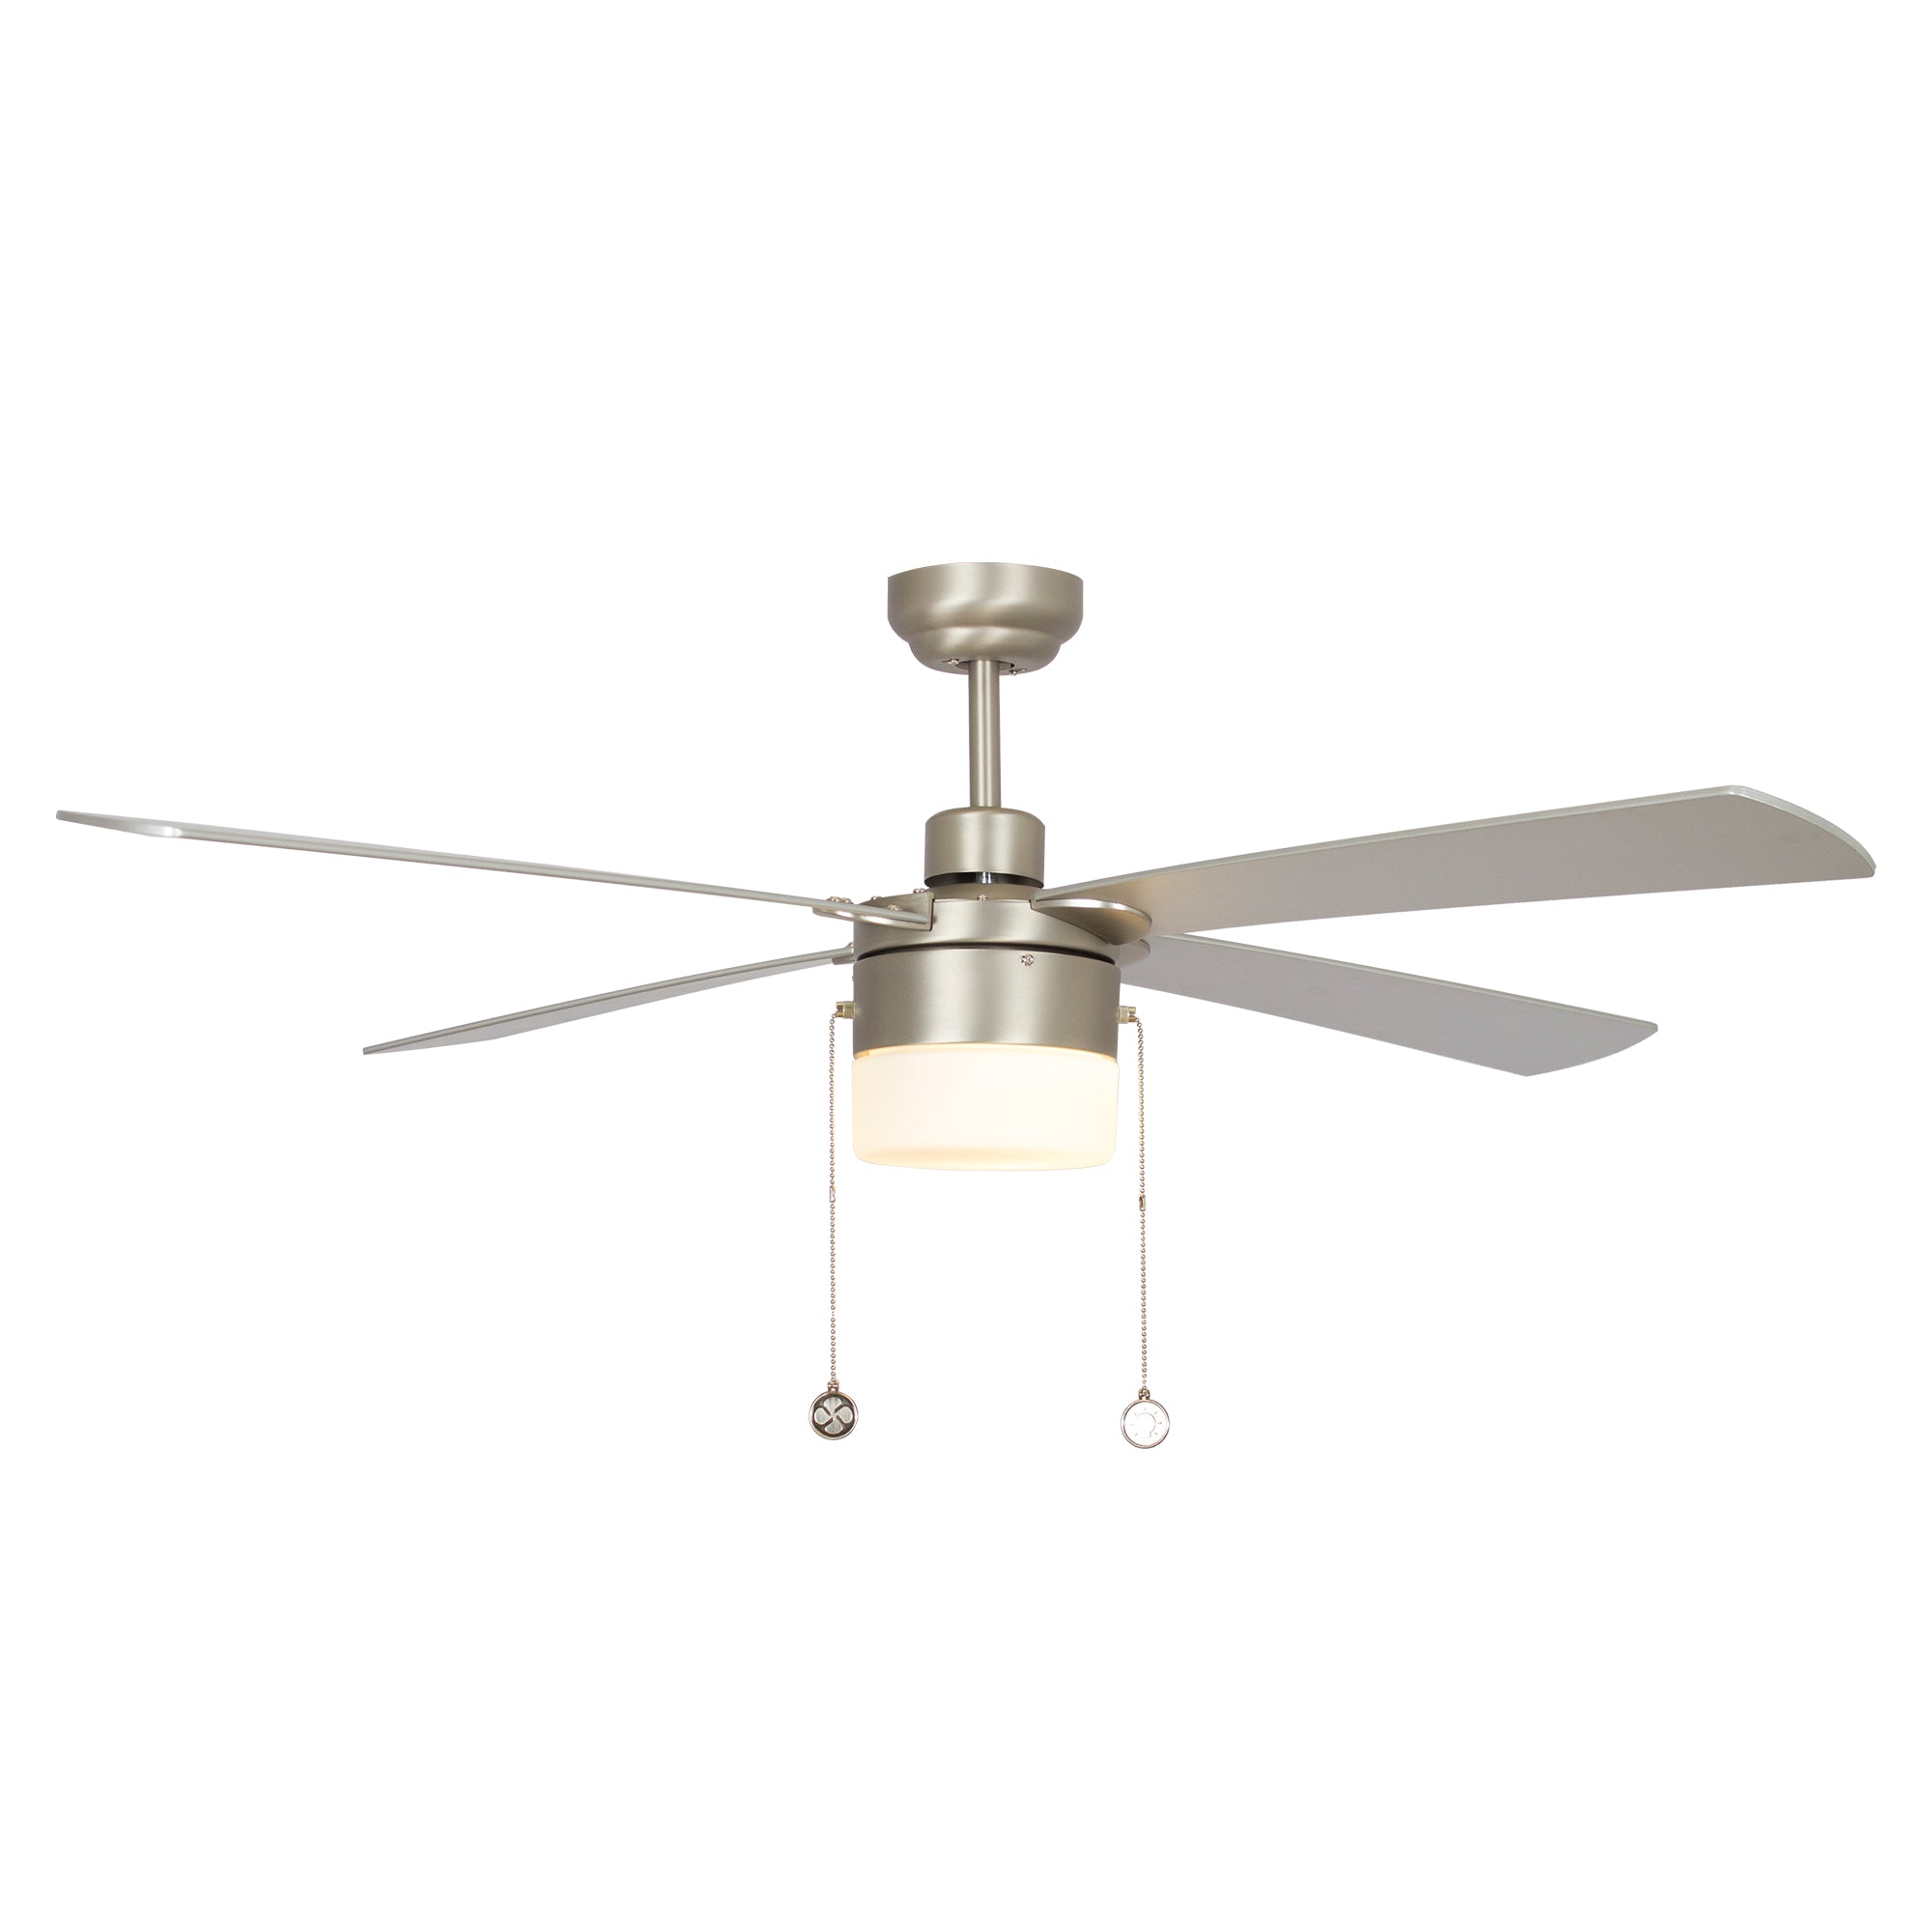 This Smafan Alrich 52&#39;&#39;Ceiling Fan keeps your space cool, bright, and stylish. It is a soft modern masterpiece perfect for your large indoor living spaces. This Model ceiling fan is a simplicity designing with Black finish, use Medium Density Fiberboard  blades and compatible with LED bulb and pull chain. The fan feature  pull chain switch to set fan speed and light bulb preferences 